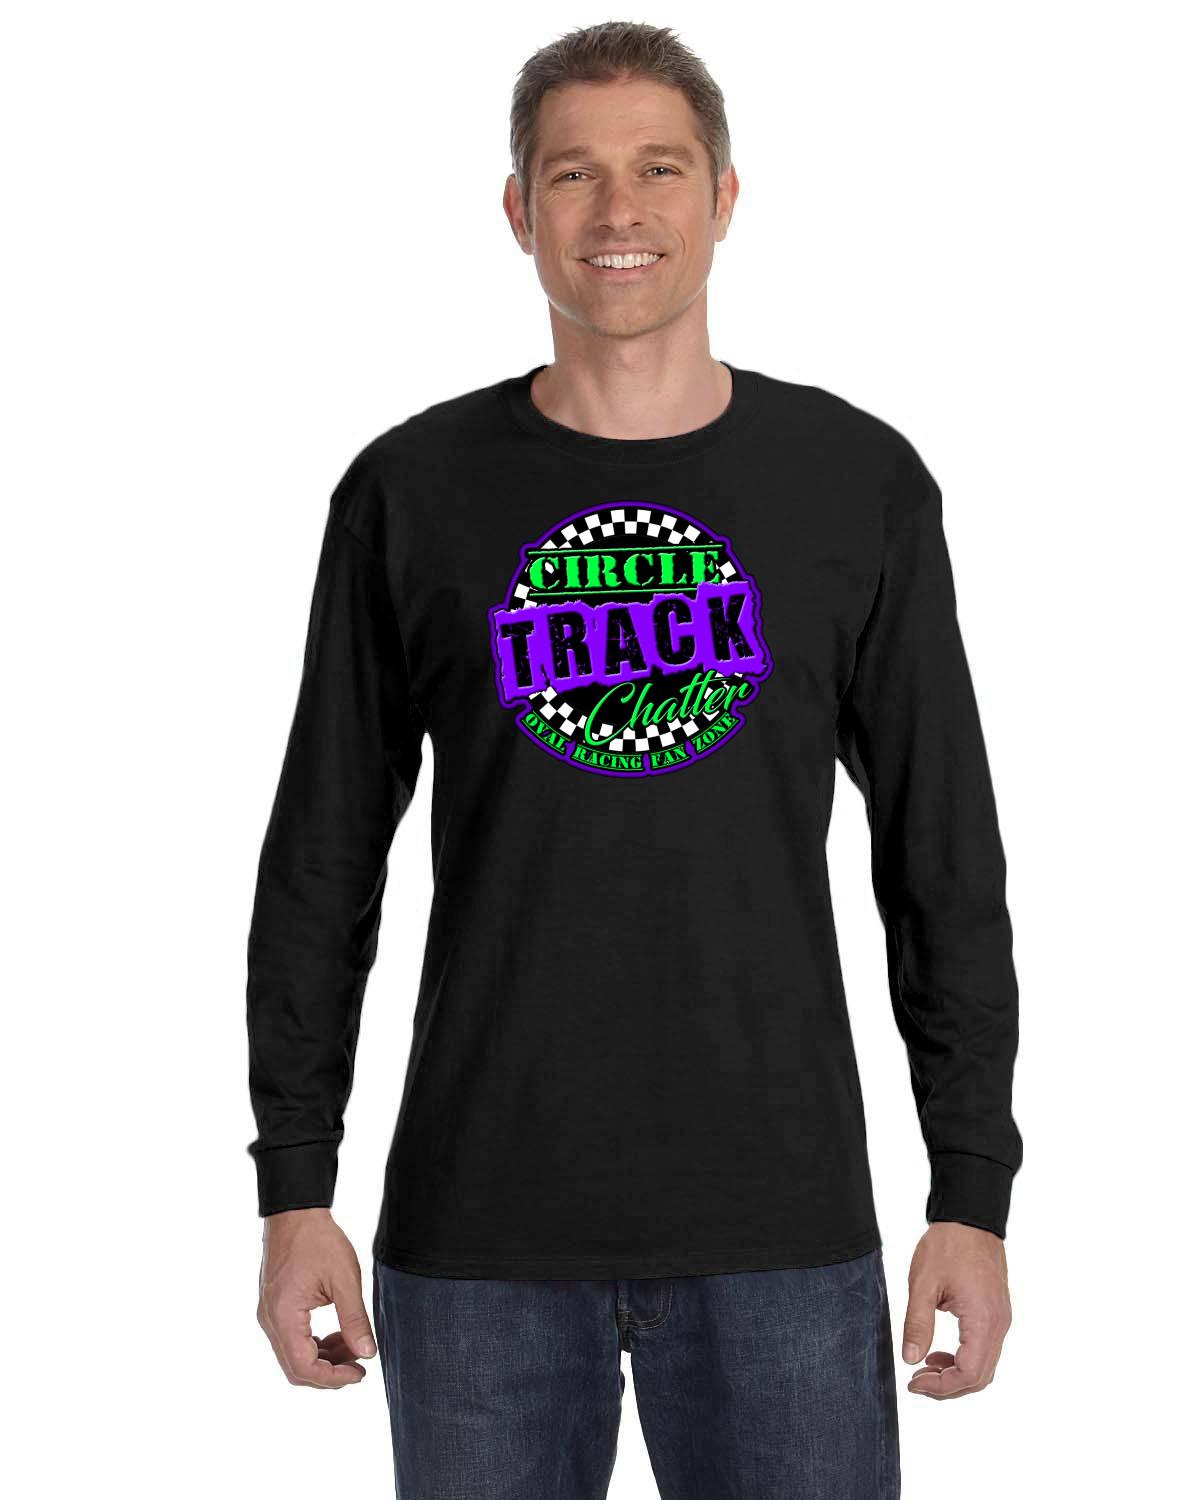 Circle Track Chatter Adult Long-Sleeve T-Shirt